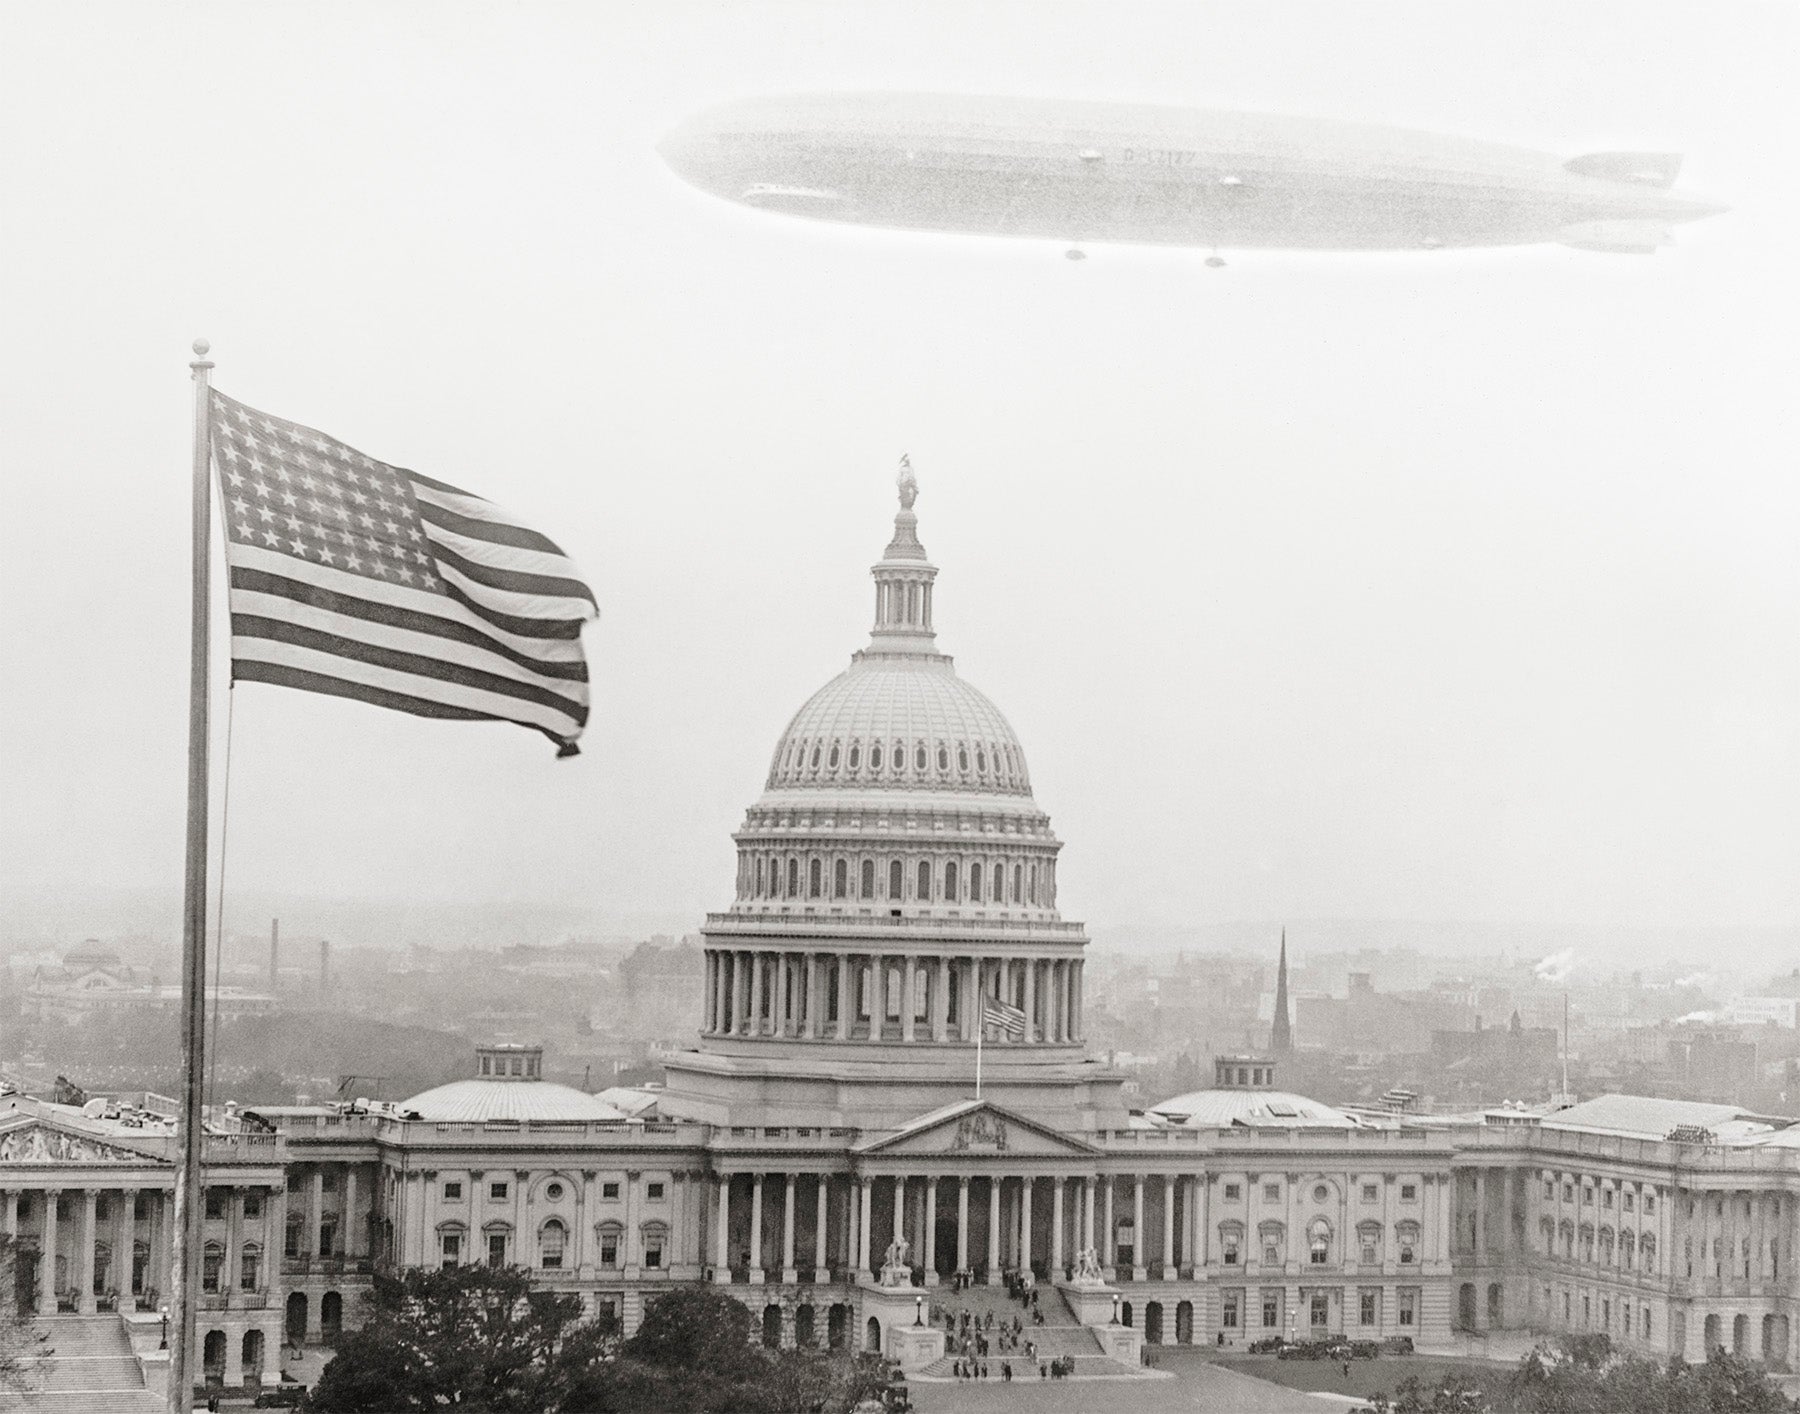 U.S. Army Blimp Flying Over US Capital, 1930s Historical Pix